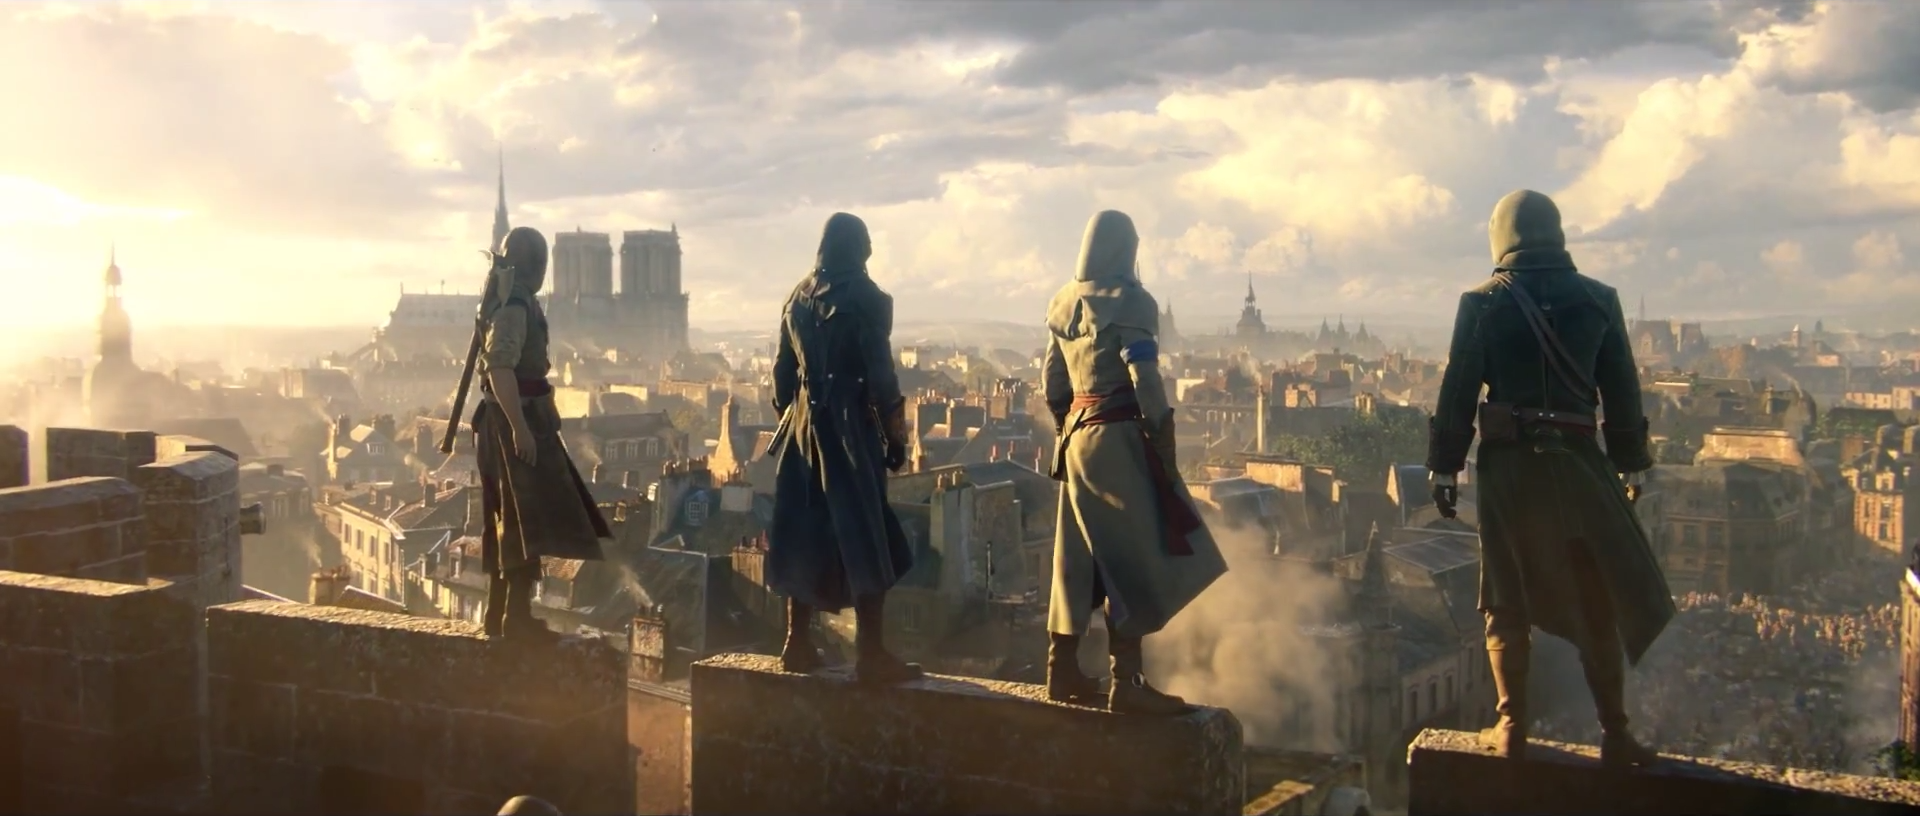 Game review: 'Assassin's Creed Unity' takes a tumble – Reading Eagle